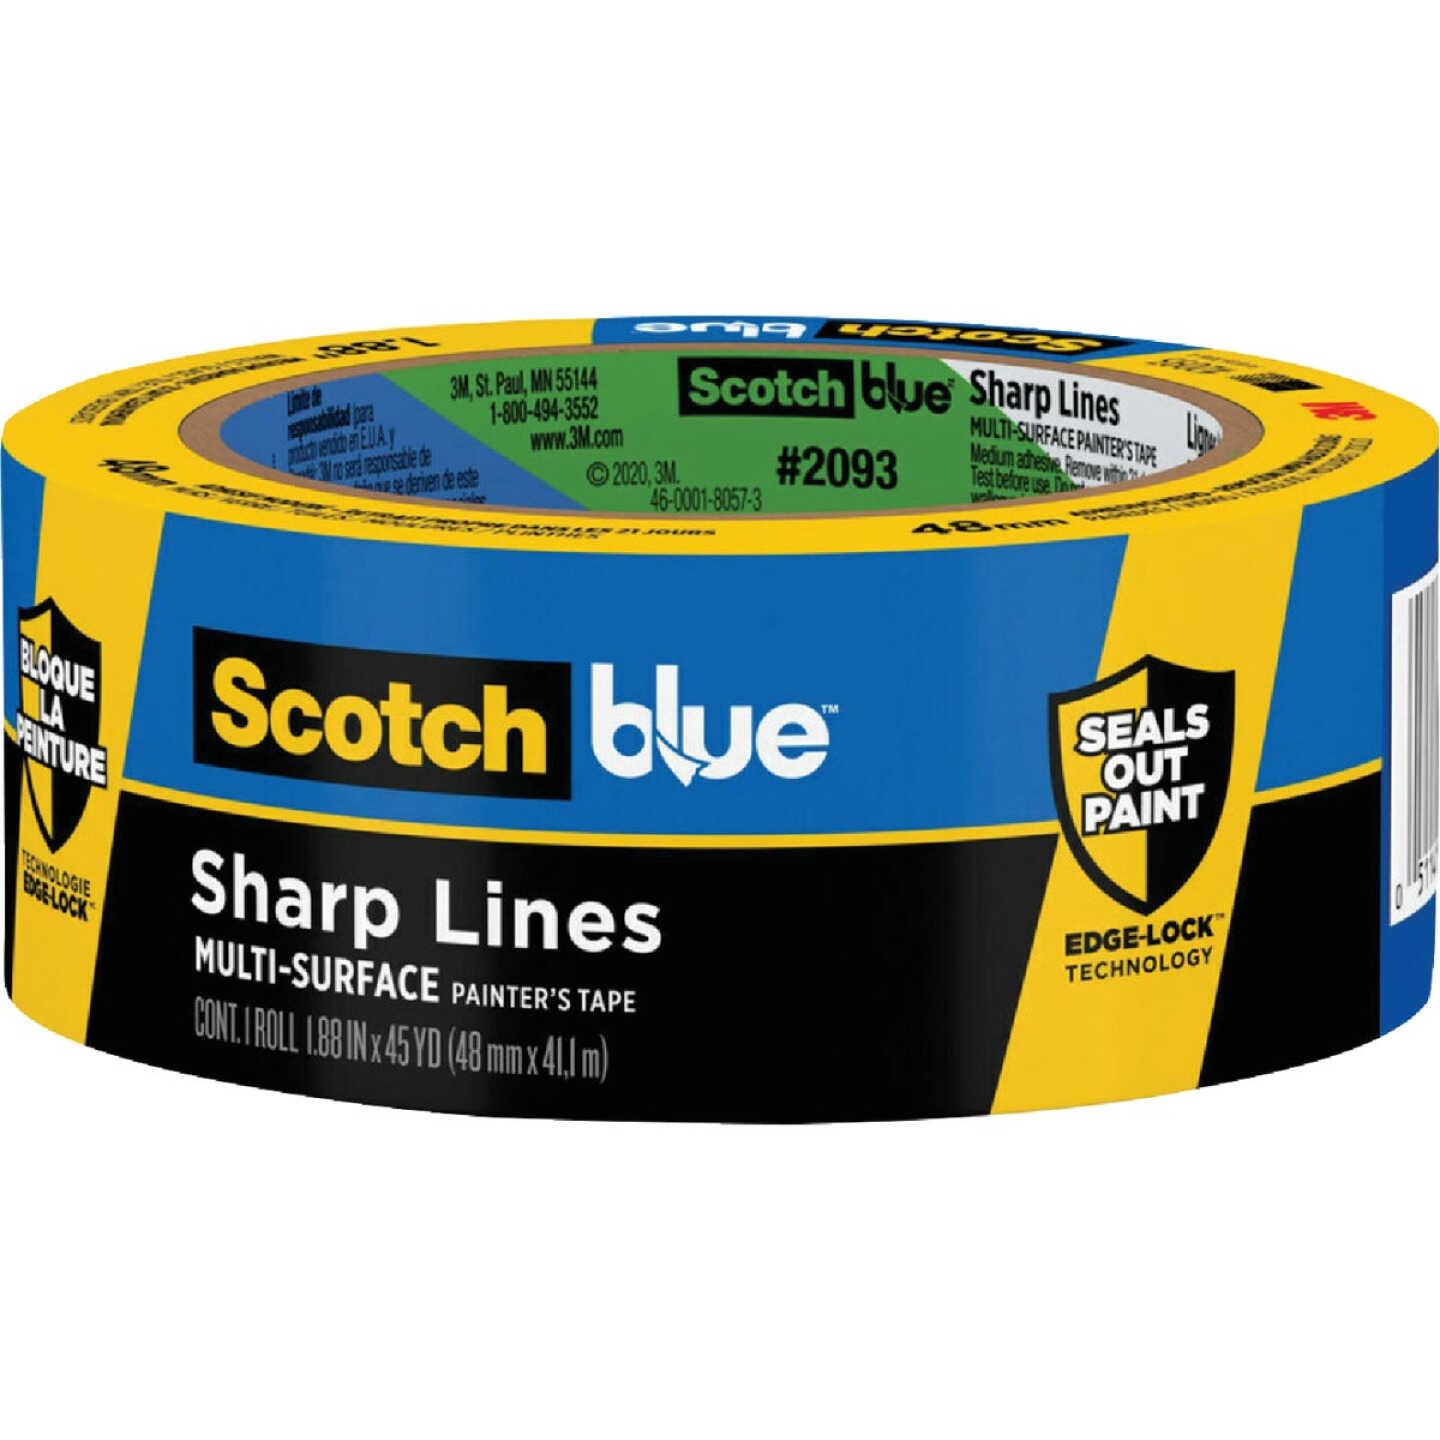 ScotchBlue 1.88 In. x 45 Yd. Sharp Lines Painter's Tape - Acme